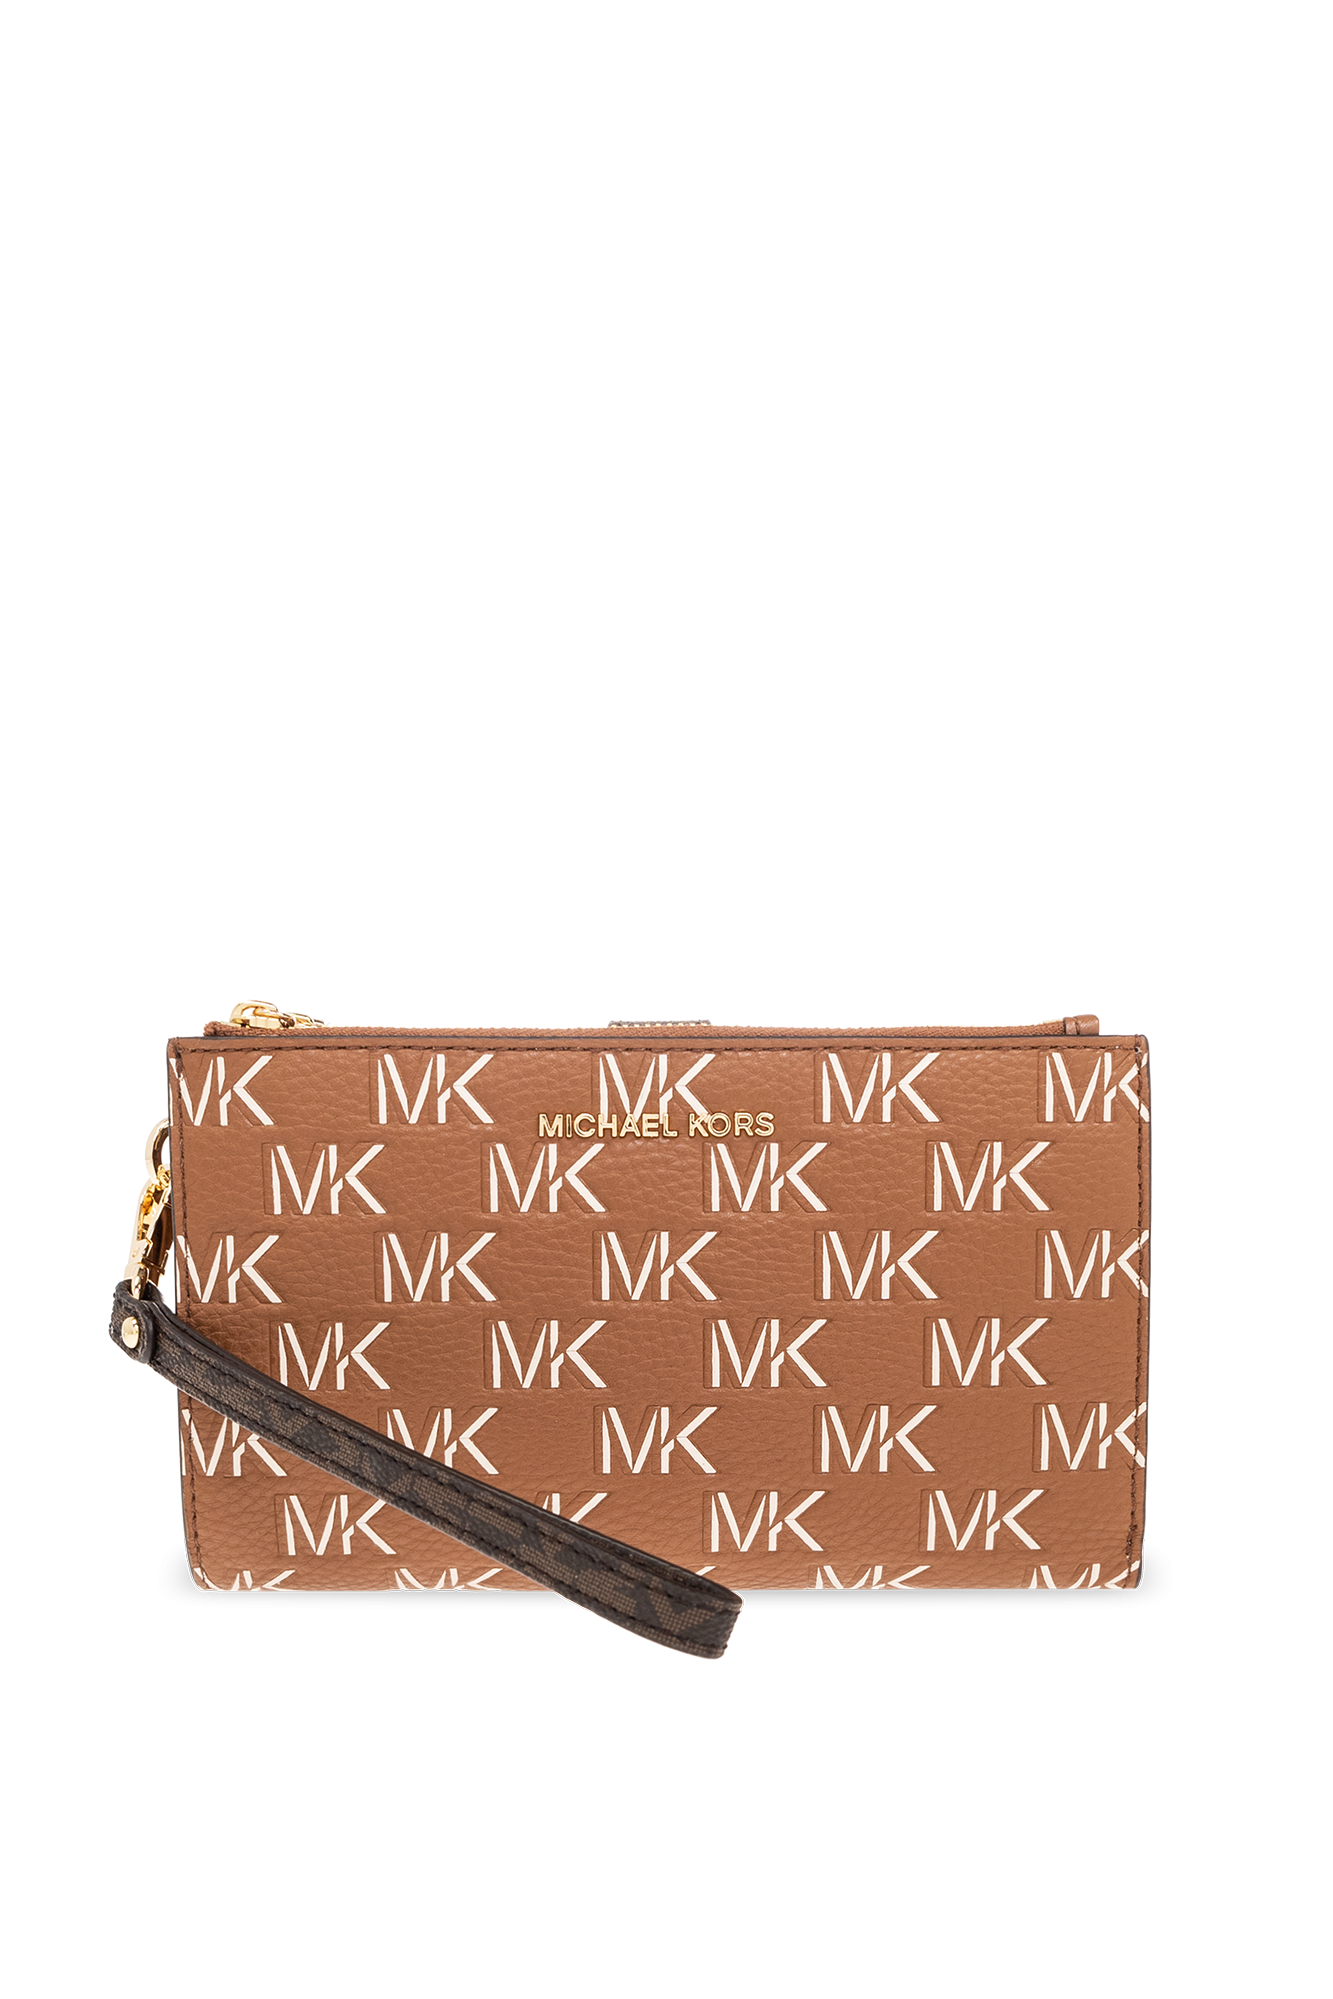 Only the necessary Monogrammed wallet